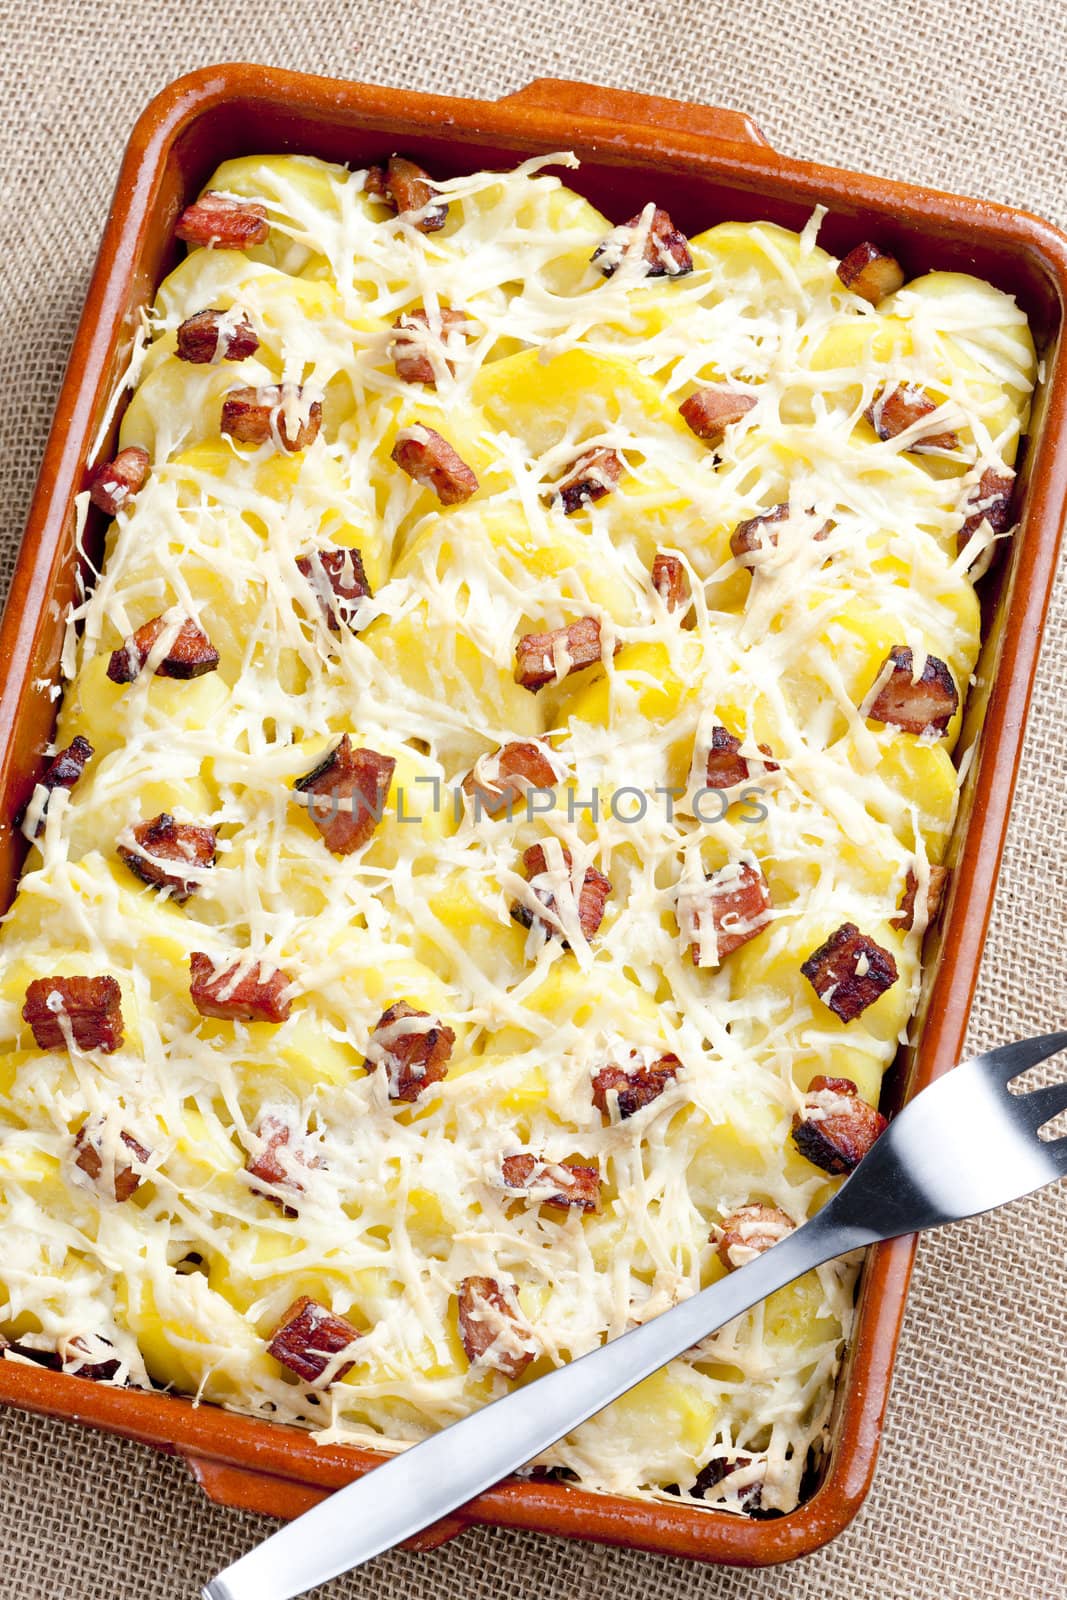 potatoes and bacon baked with pecorino cheese by phbcz